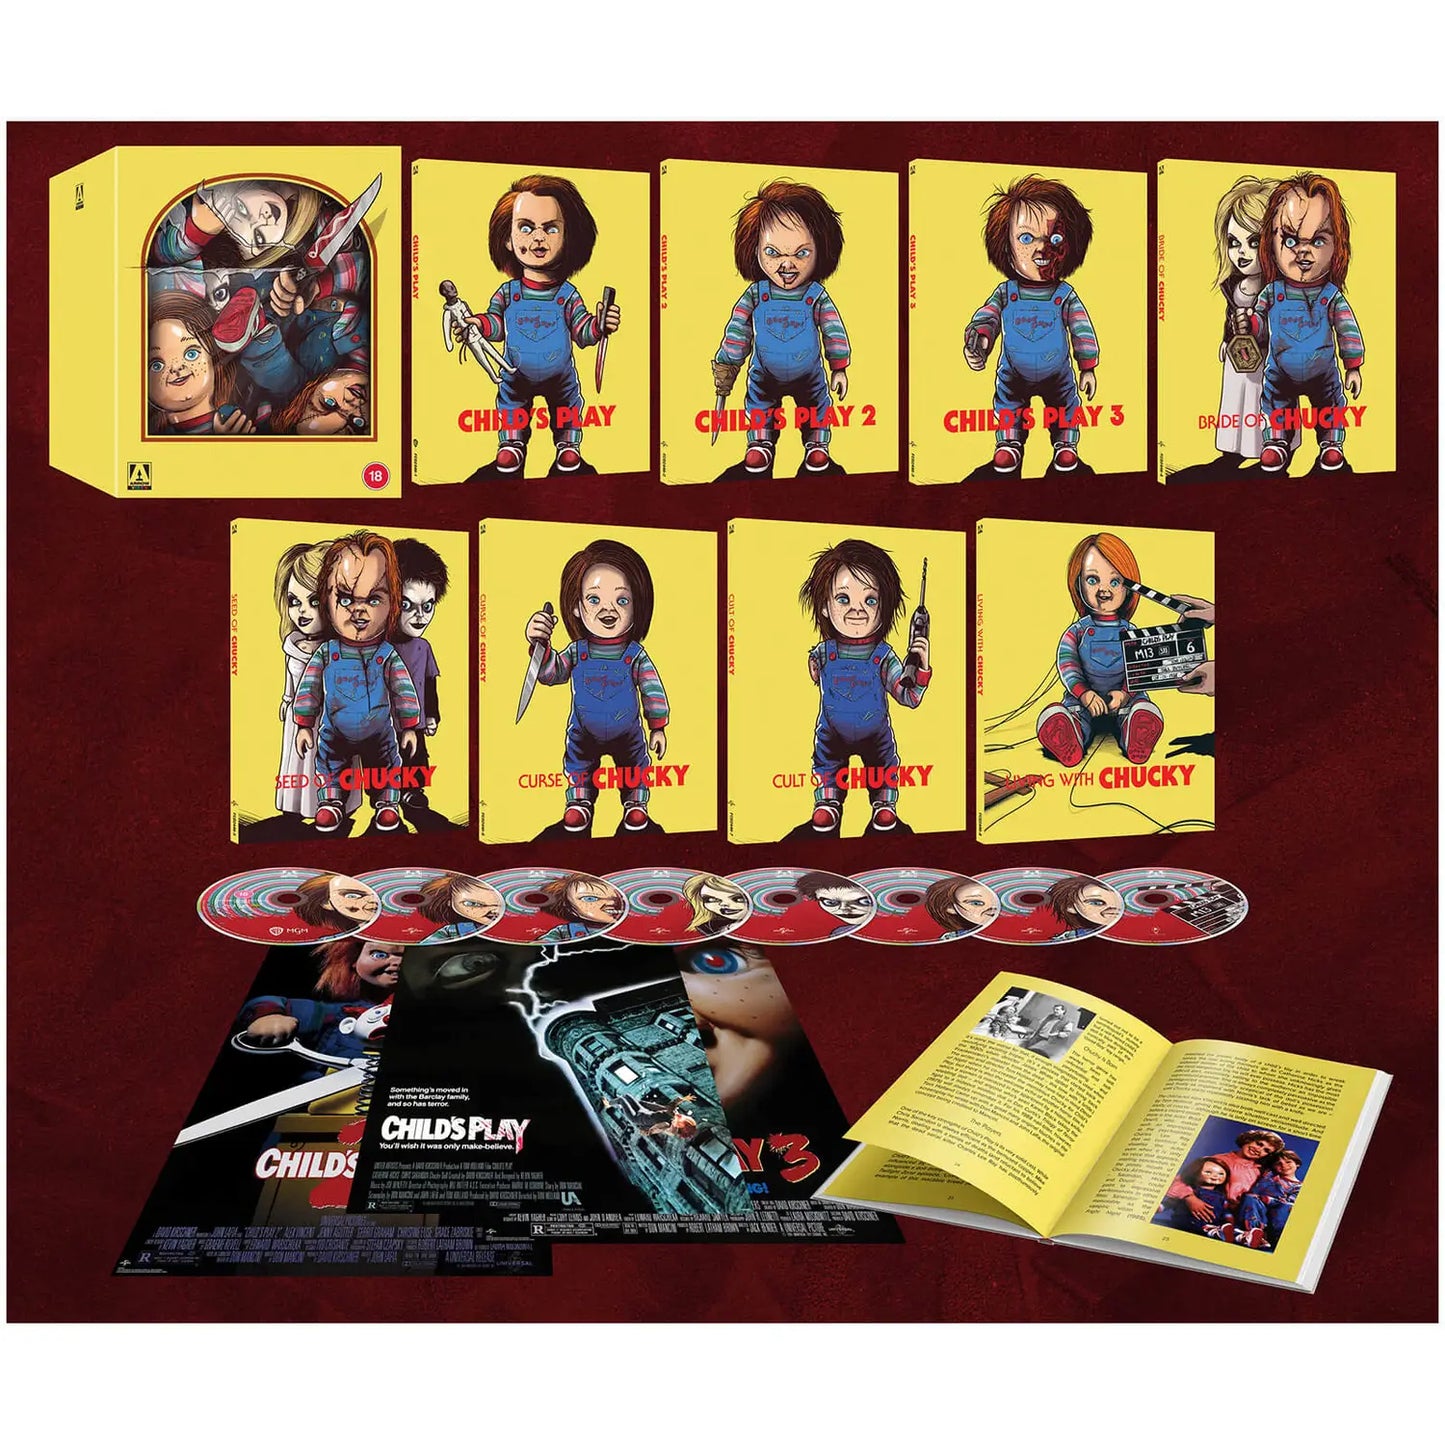 Child's Play Collection - Limited Edition Arrow Video Box Set - Blu-ray Region B